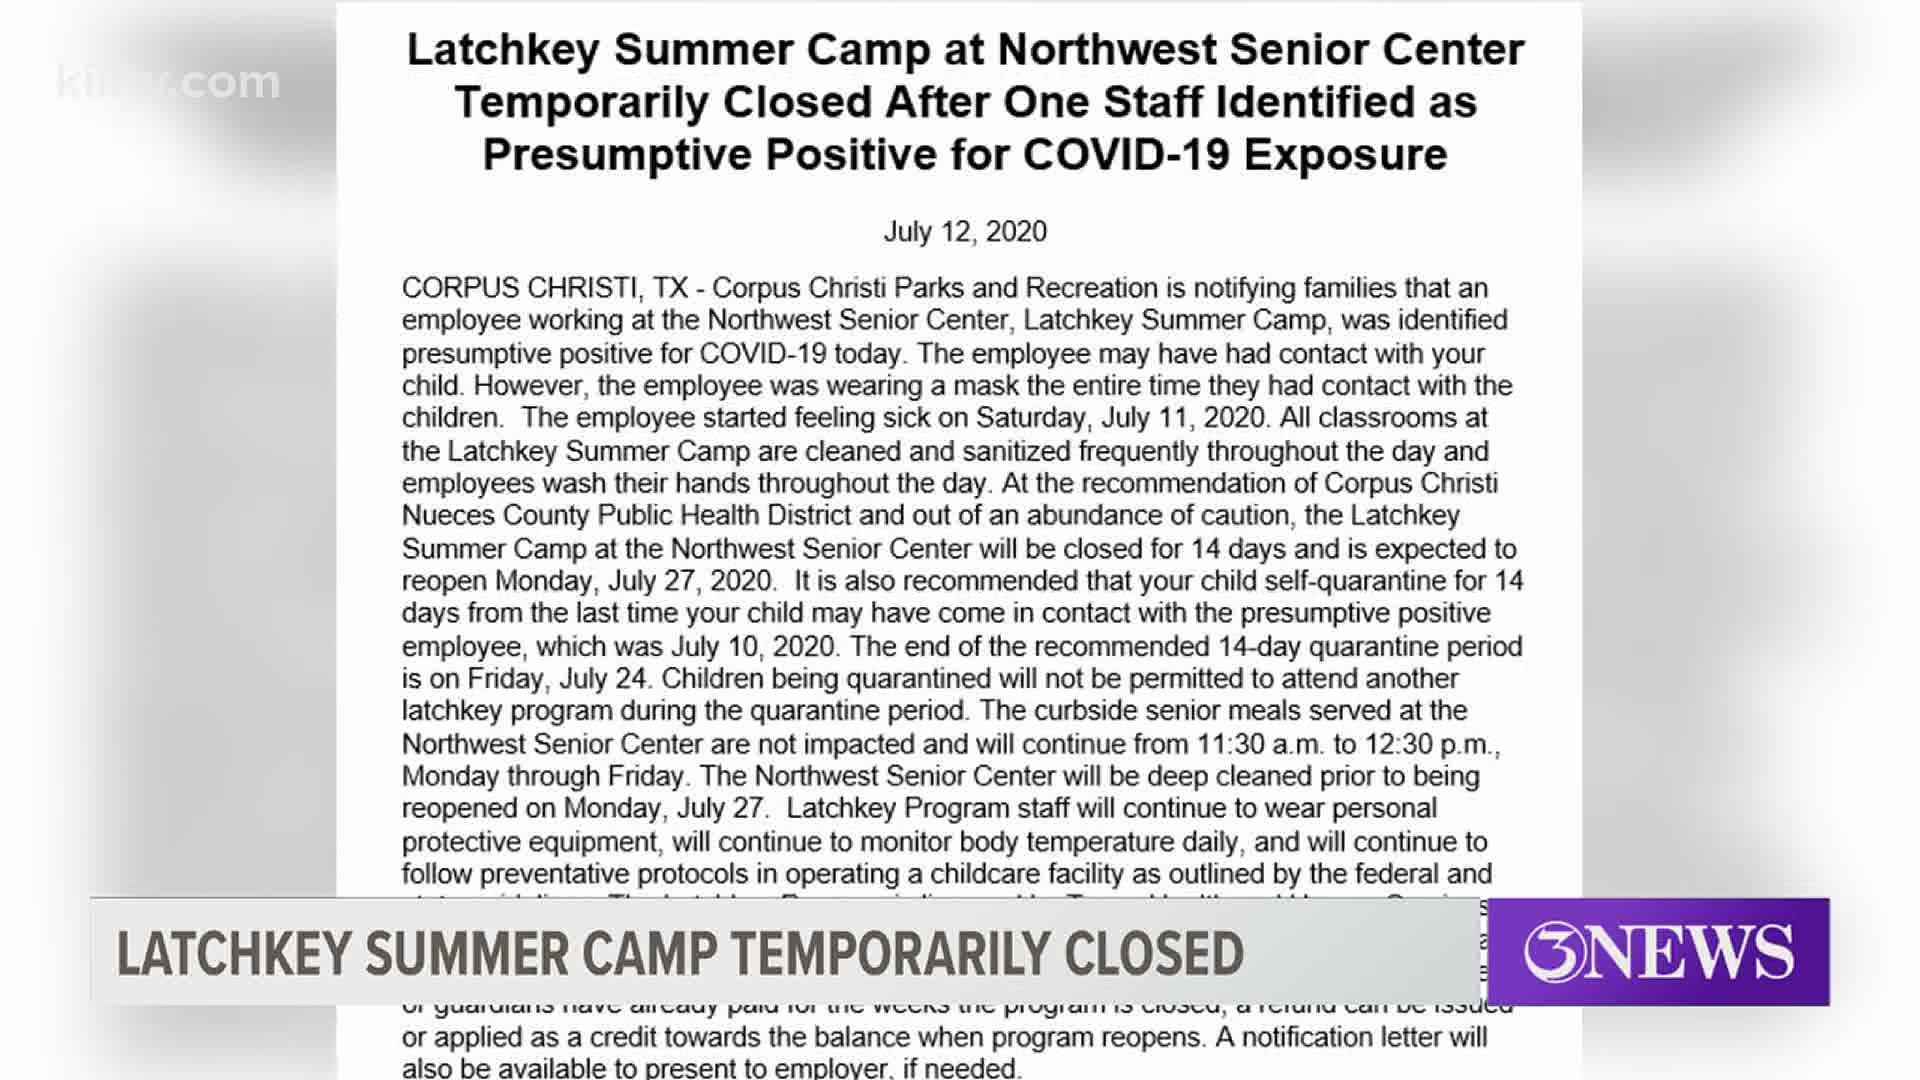 The Latchkey Summer Camp at the Northwest Senior Center will be closed for 14 days and is expected to reopen Monday, July 27, 2020.